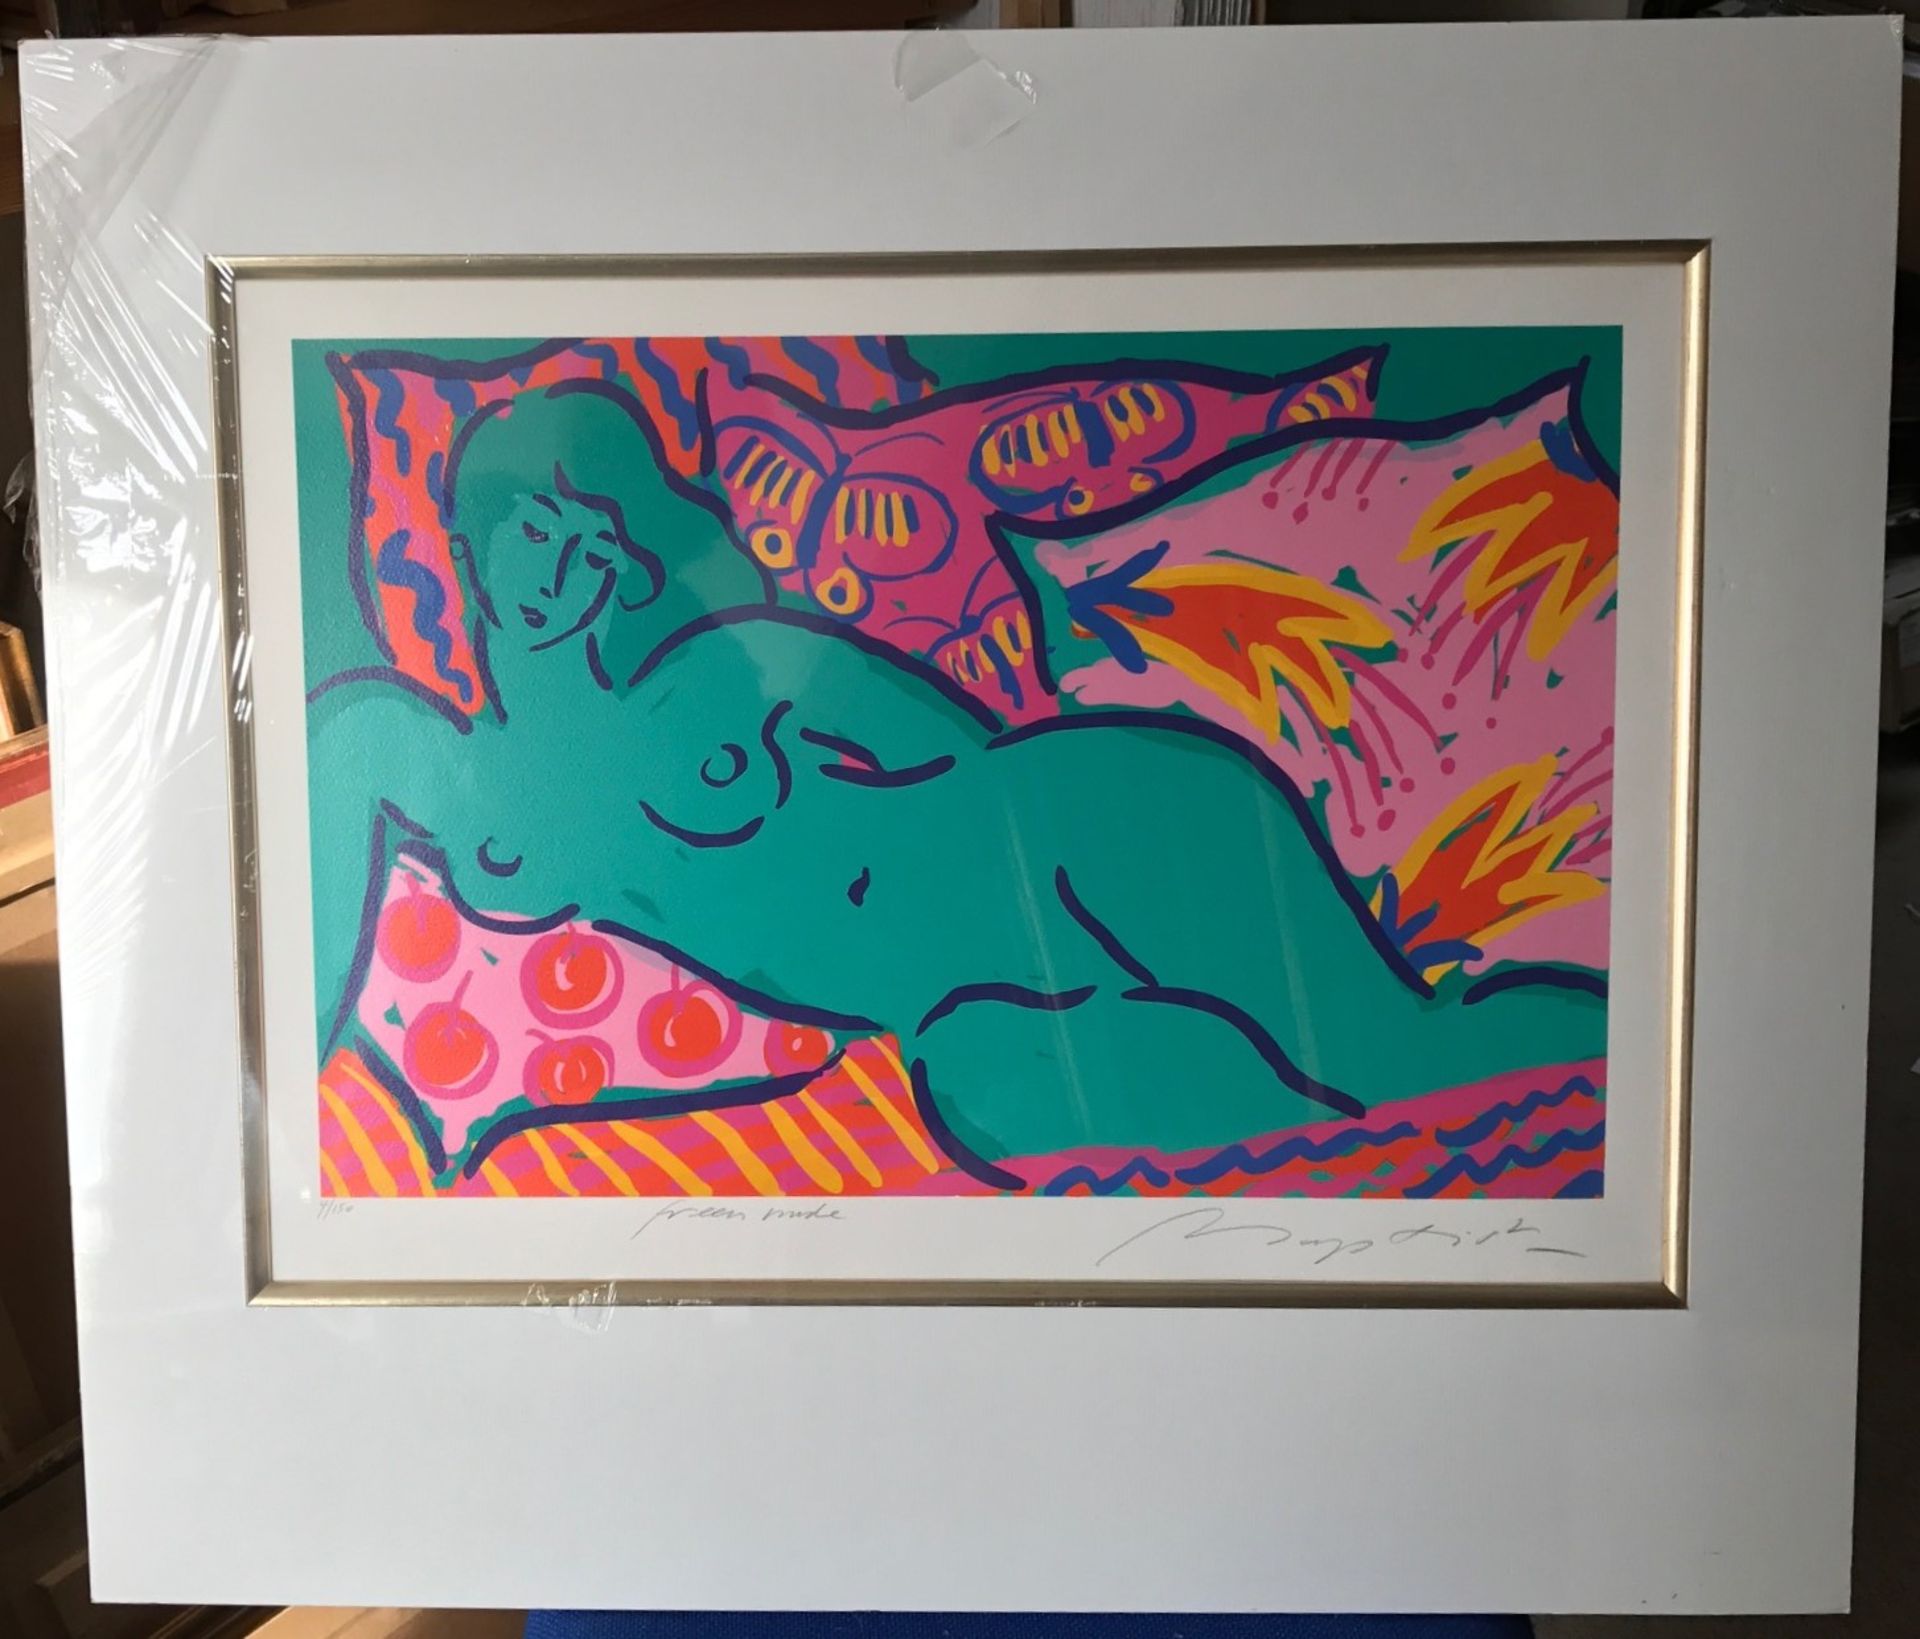 The Green Nude signed and numbered Limited edition Silk Screen Print by British artist Gerry Baptist - Image 2 of 6